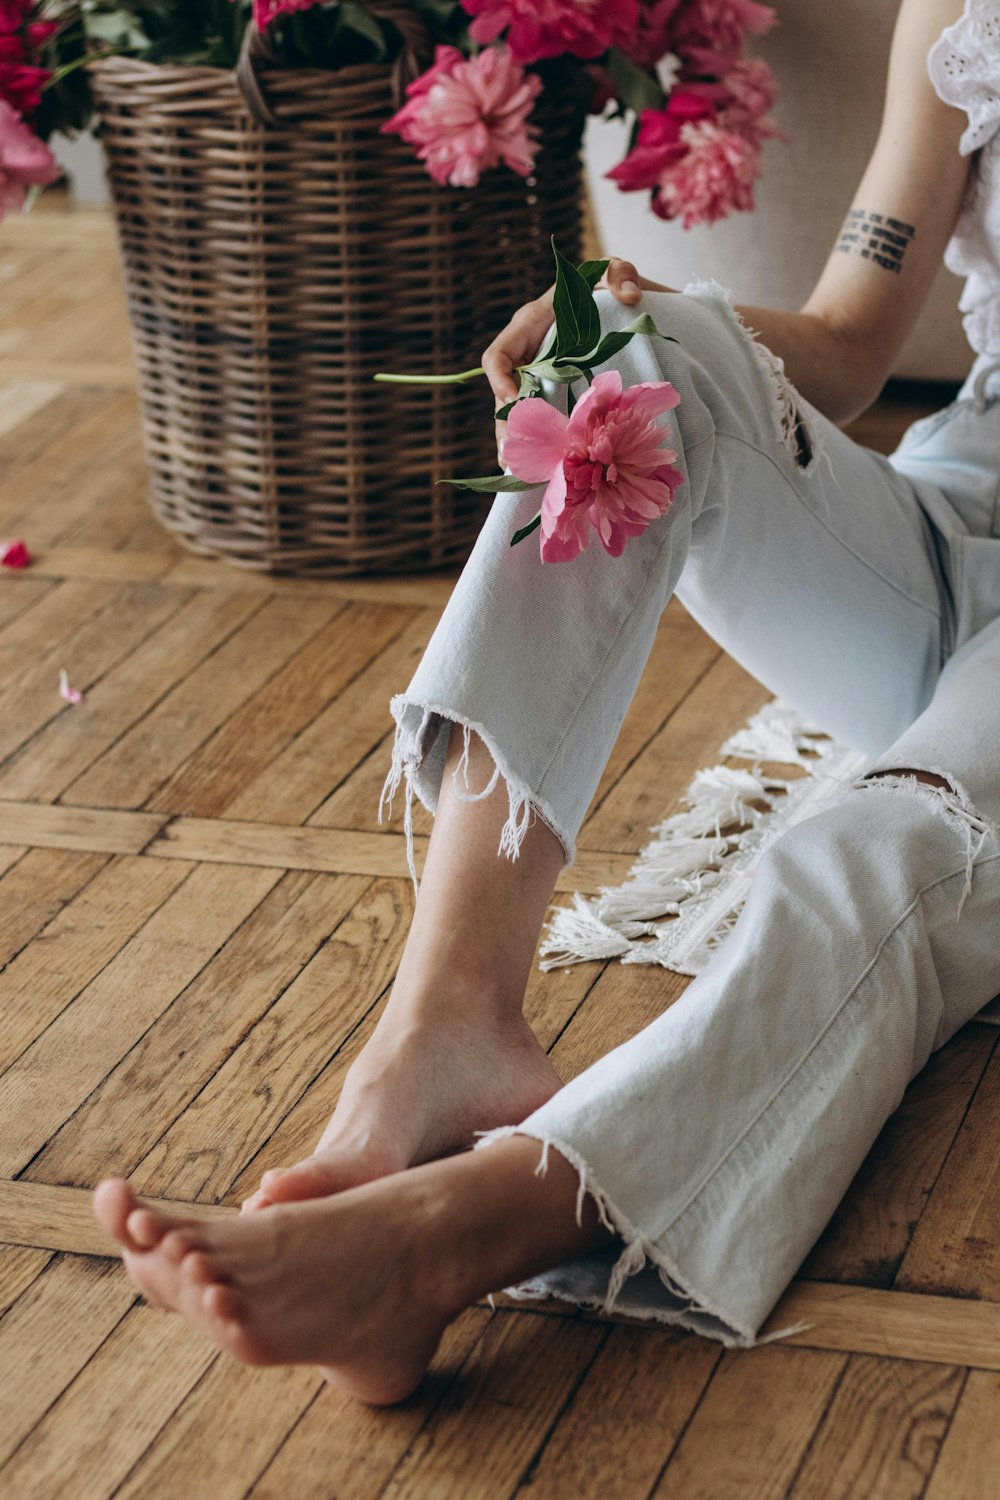 a woman sitting on the floor holding a flower